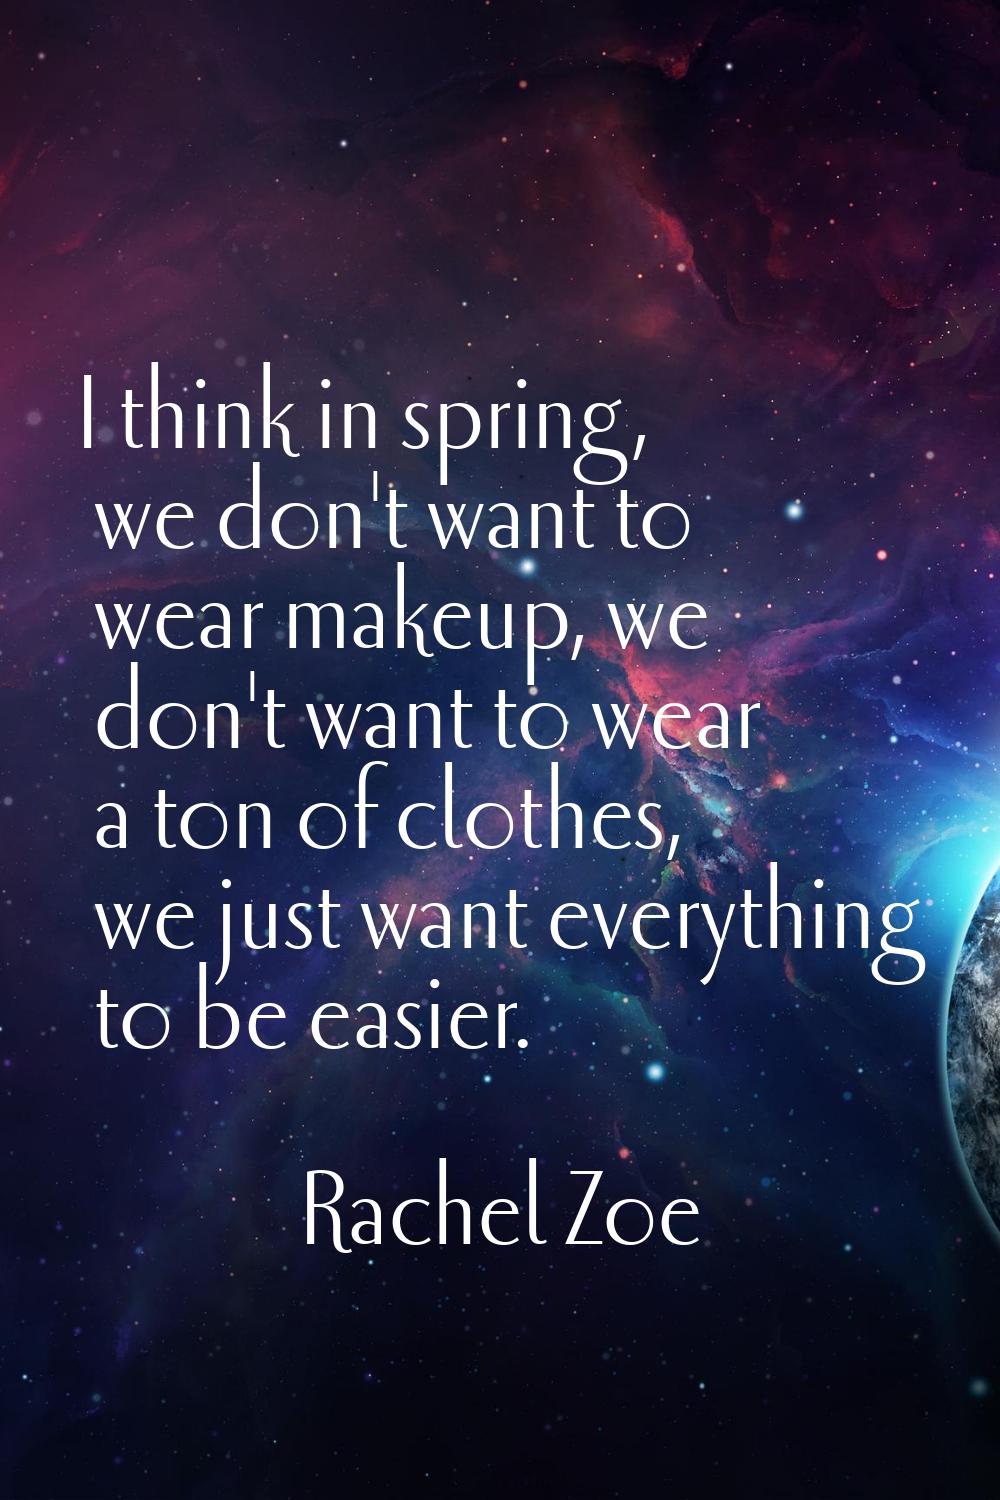 I think in spring, we don't want to wear makeup, we don't want to wear a ton of clothes, we just wa